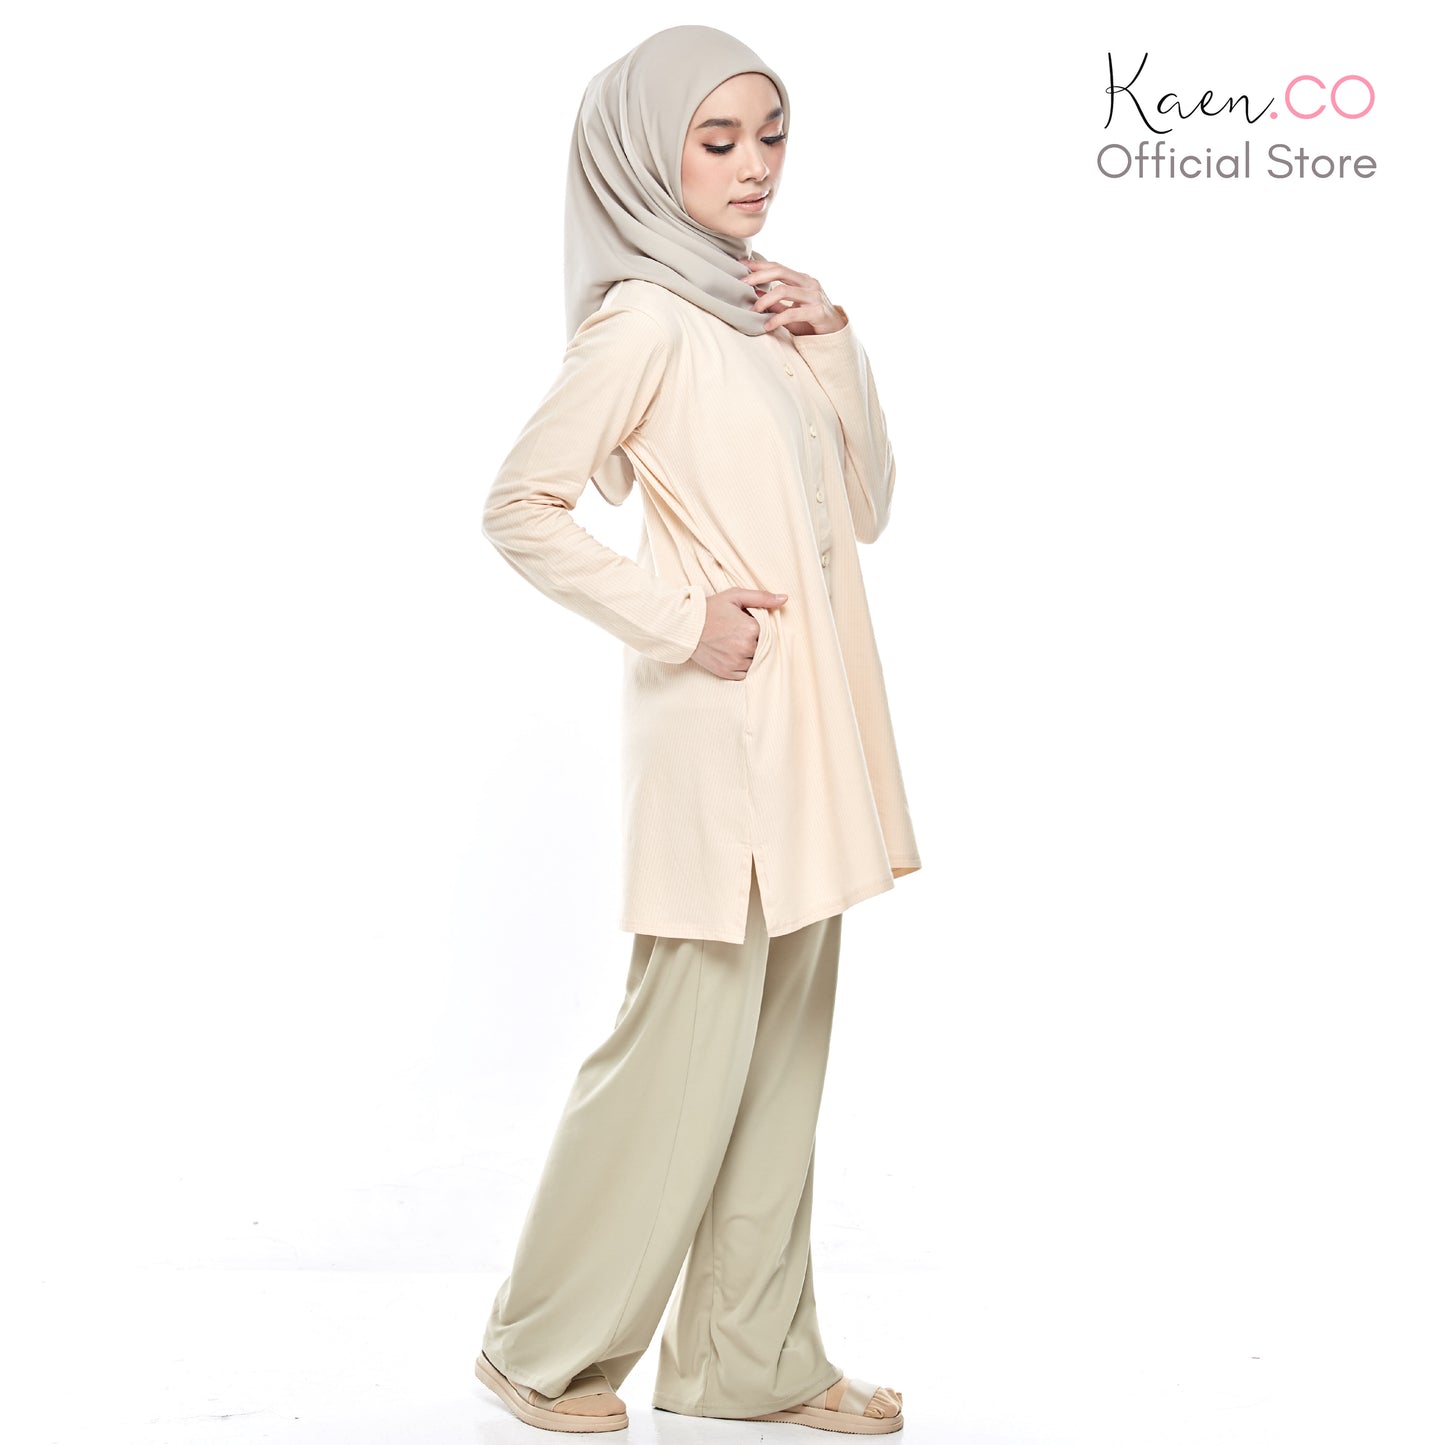 FEIV Long Cardigan Blouse in Cream (Top)